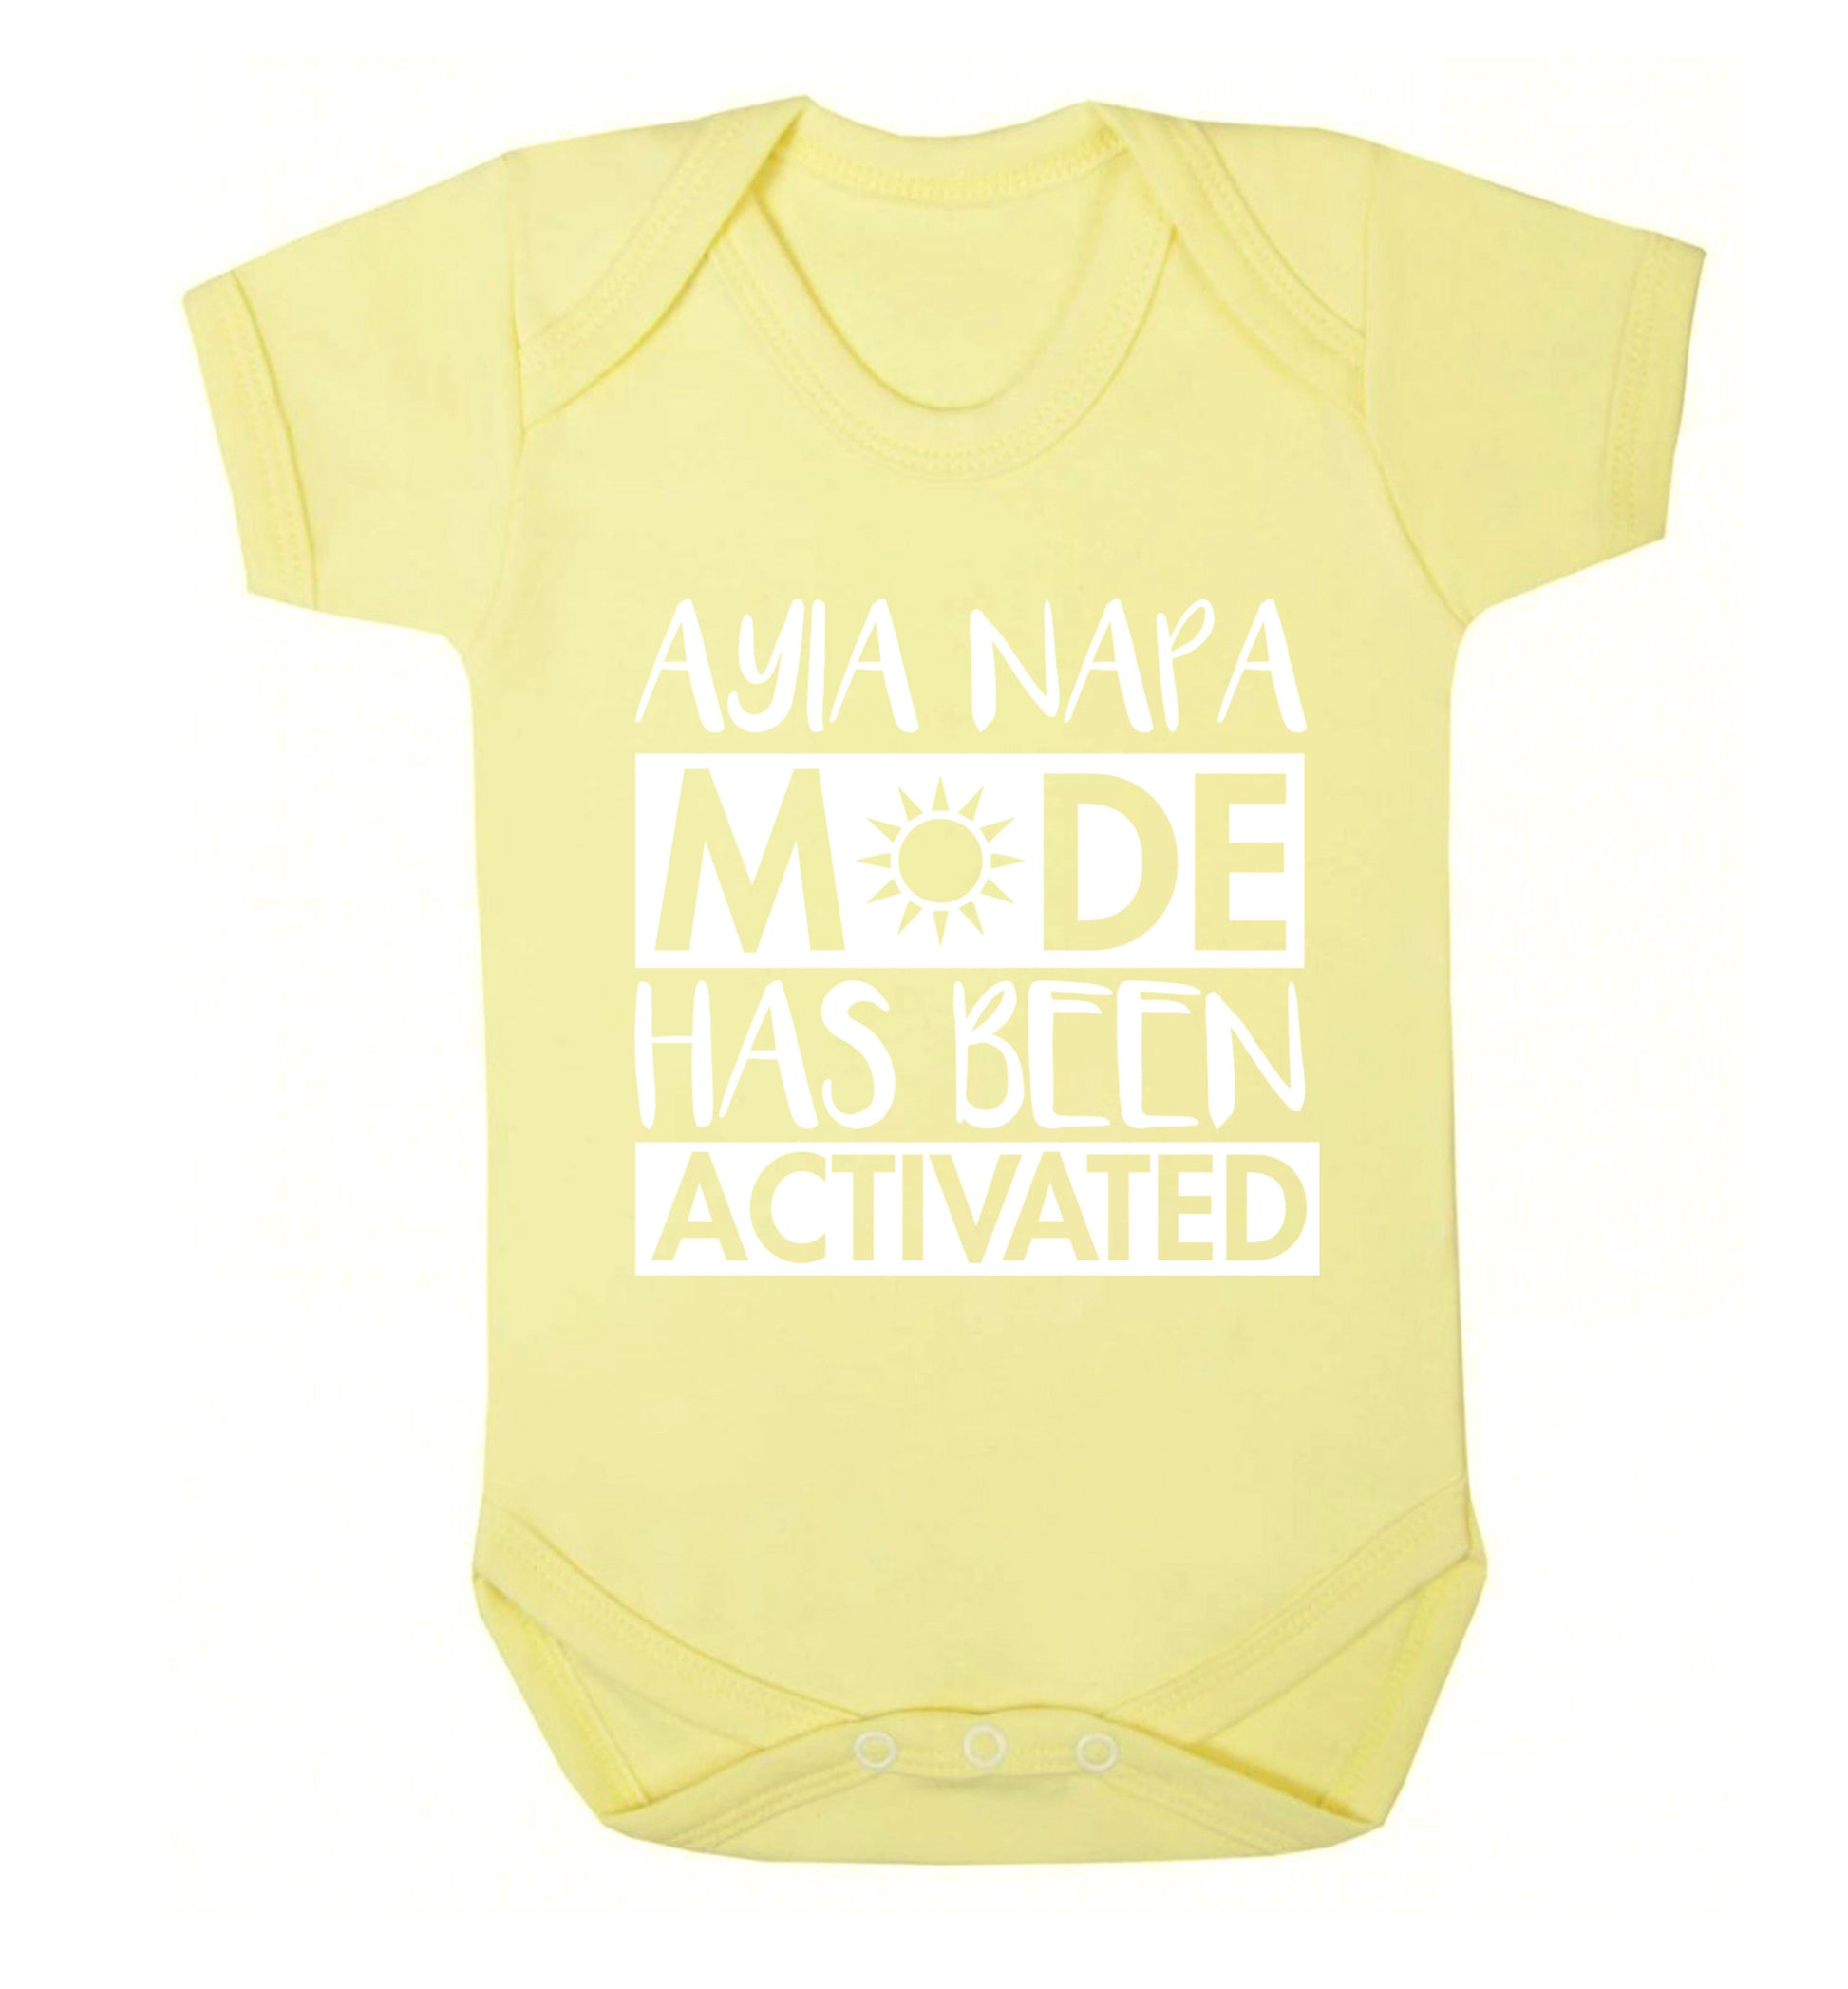 Aiya Napa mode has been activated Baby Vest pale yellow 18-24 months